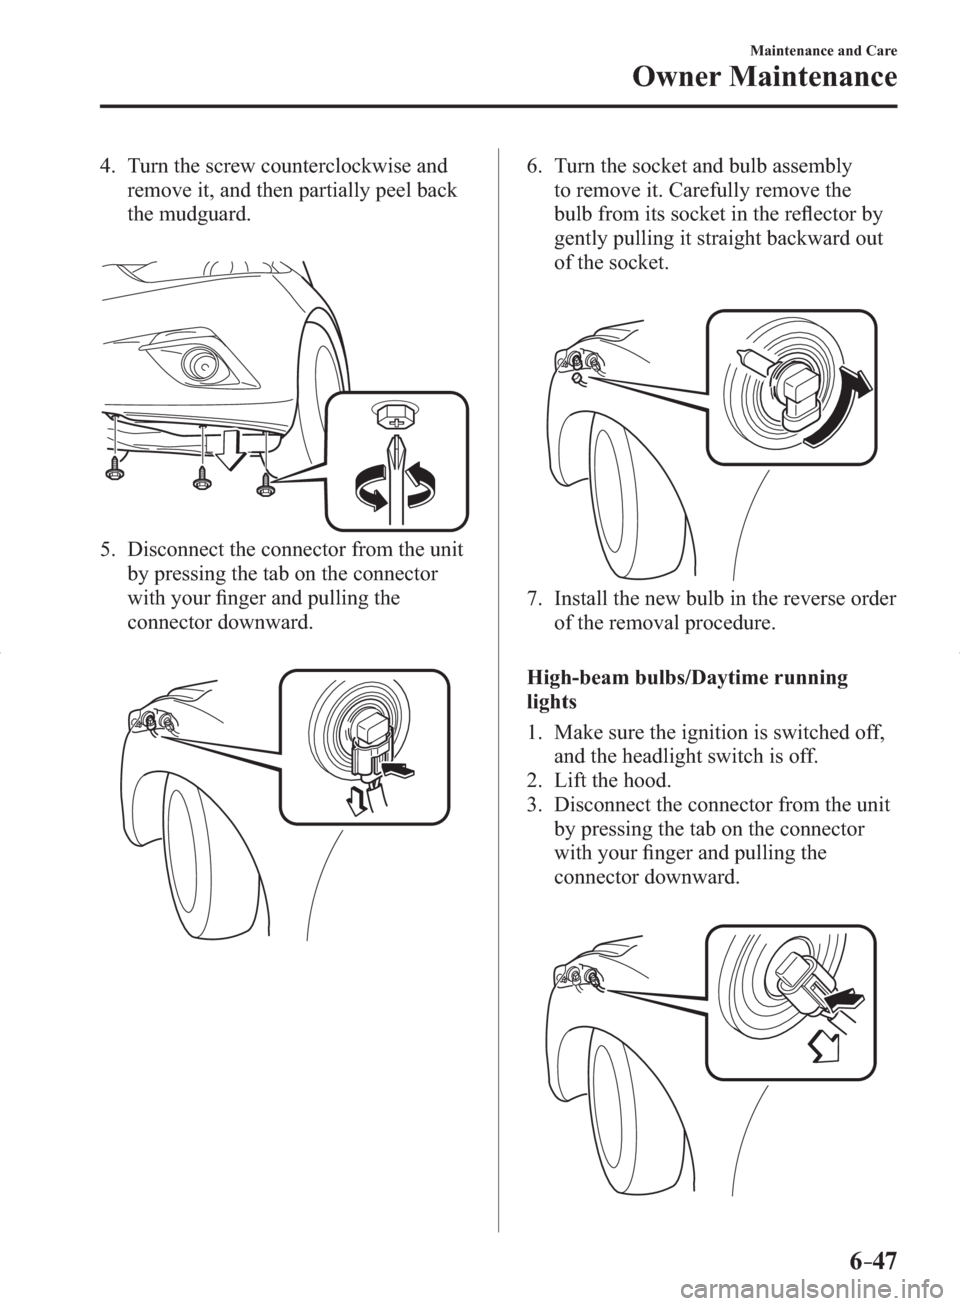 MAZDA MODEL 3 HATCHBACK 2014  Owners Manual (in English) 6–47
Maintenance and Care
Owner Maintenance
   4.   Turn  the  screw  counterclockwise  and 
remove it, and then partially peel back 
the mudguard.
   5.   Disconnect the connector from the unit 
by